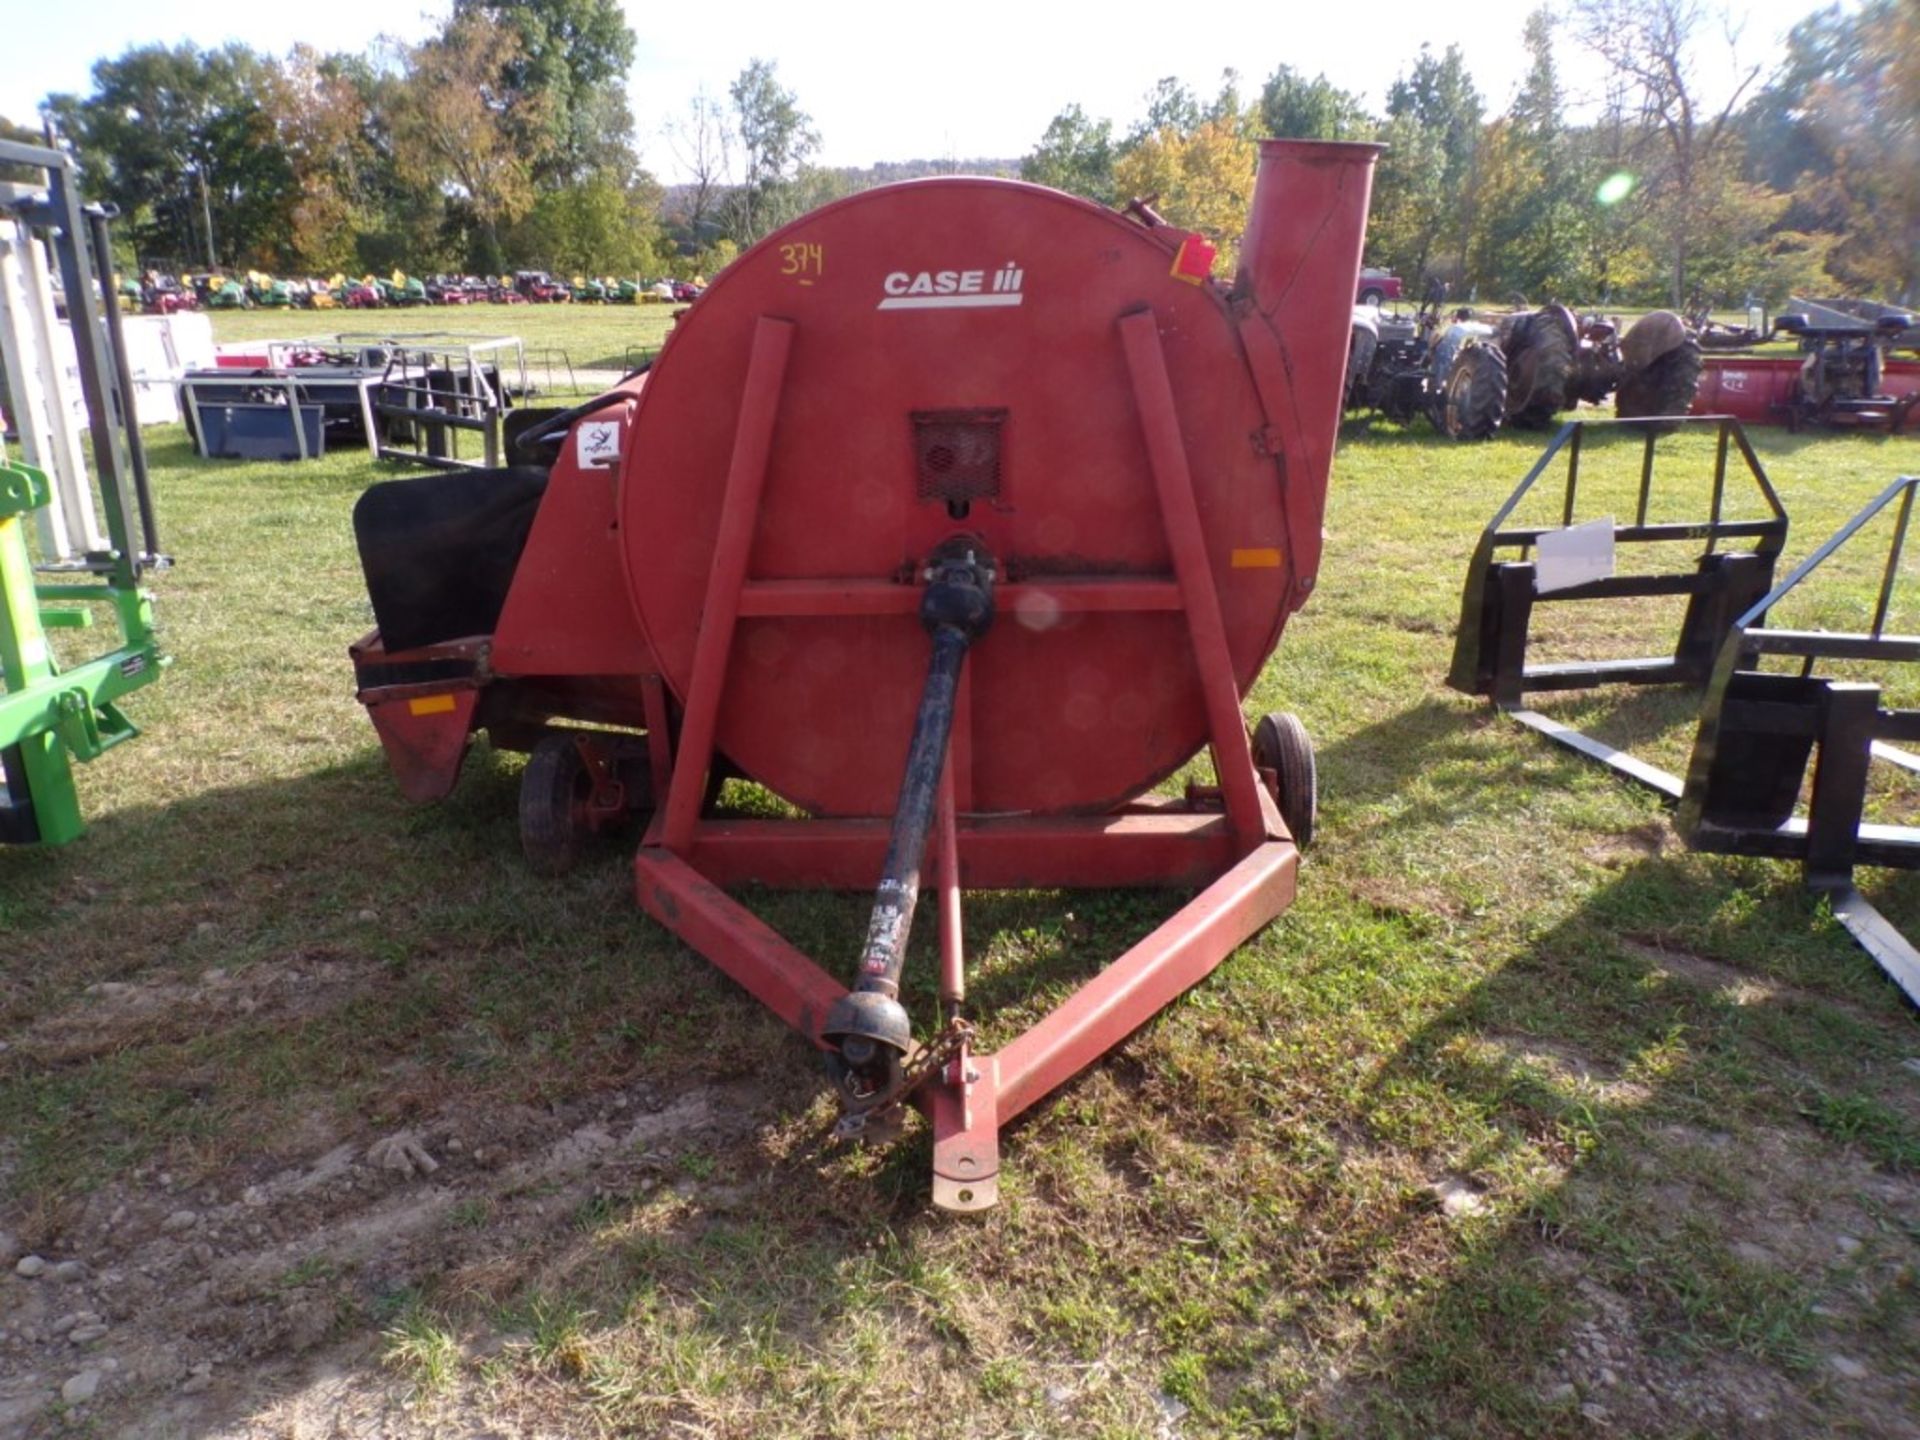 Case IH Model 600, Towable, PTO Blower, S/N: 032574 (5088) - Image 2 of 4